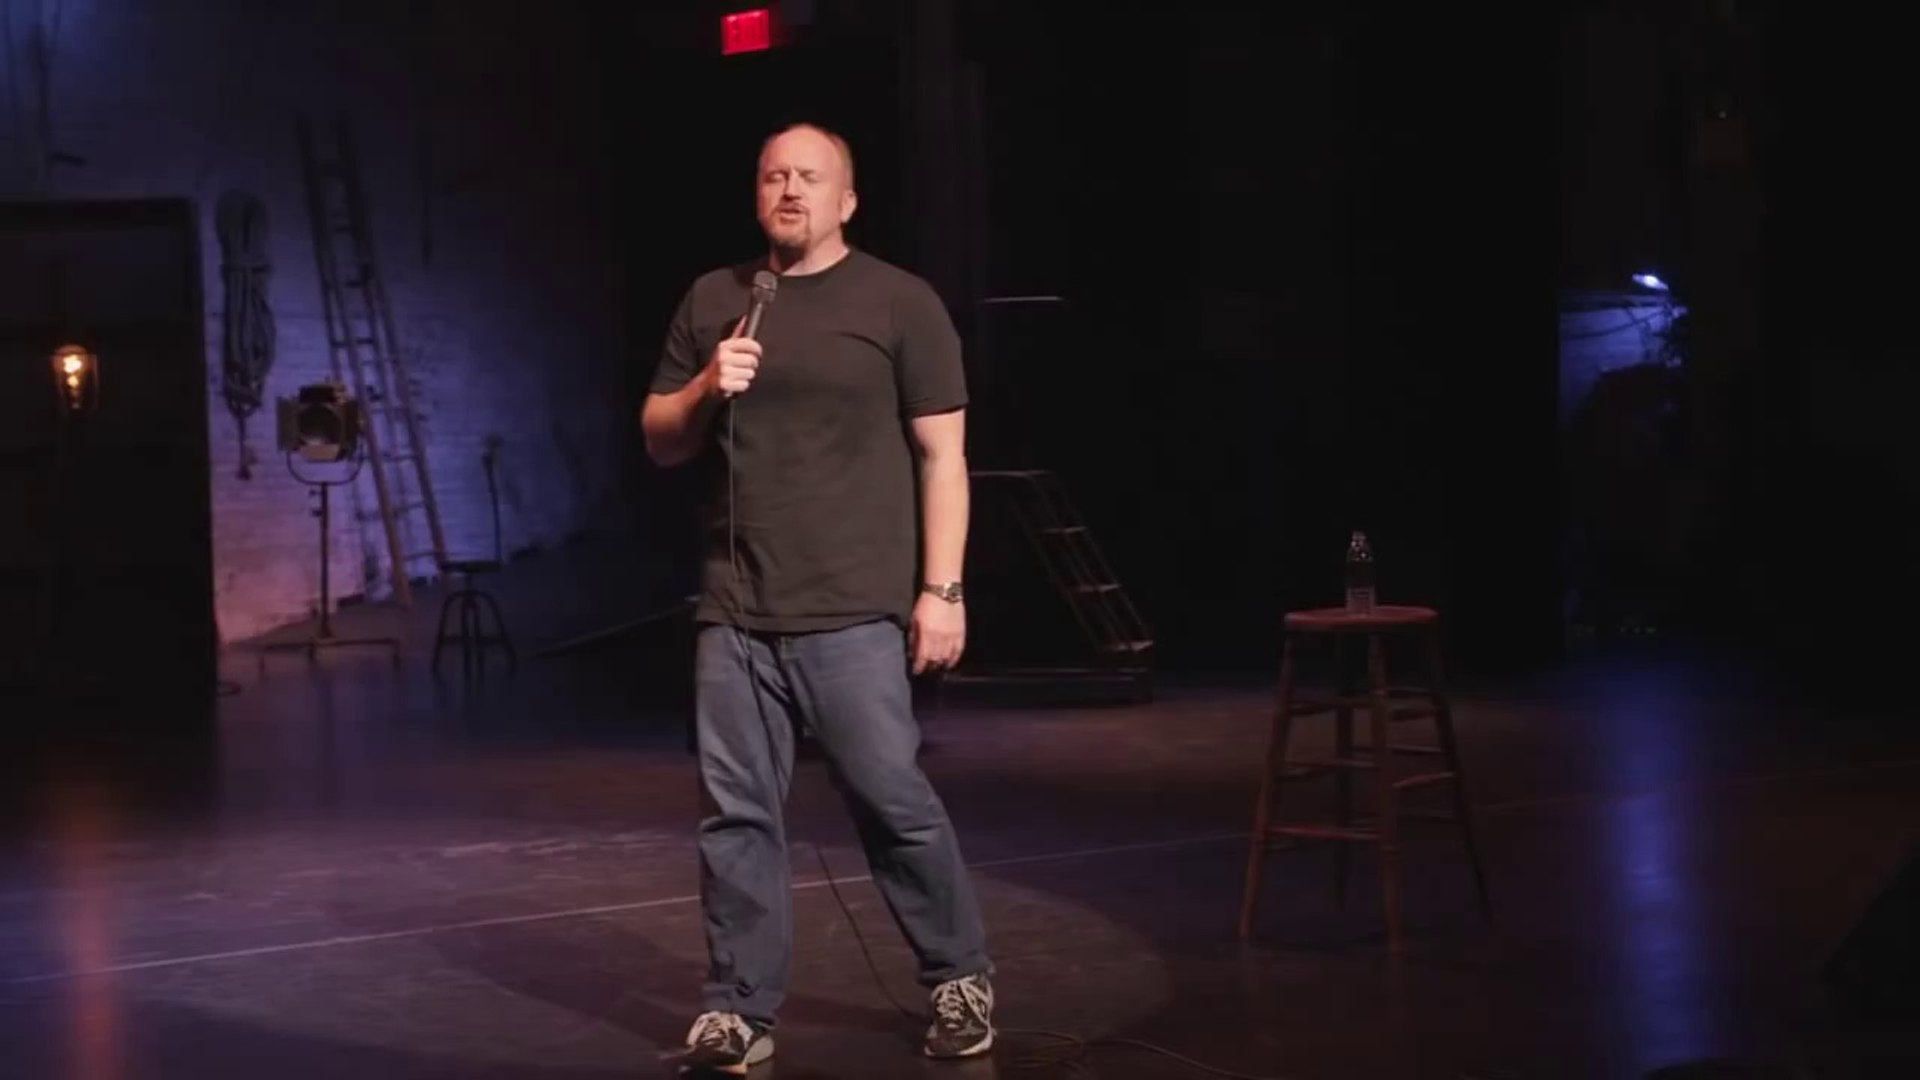 Live at the Beacon Theater – Louis CK